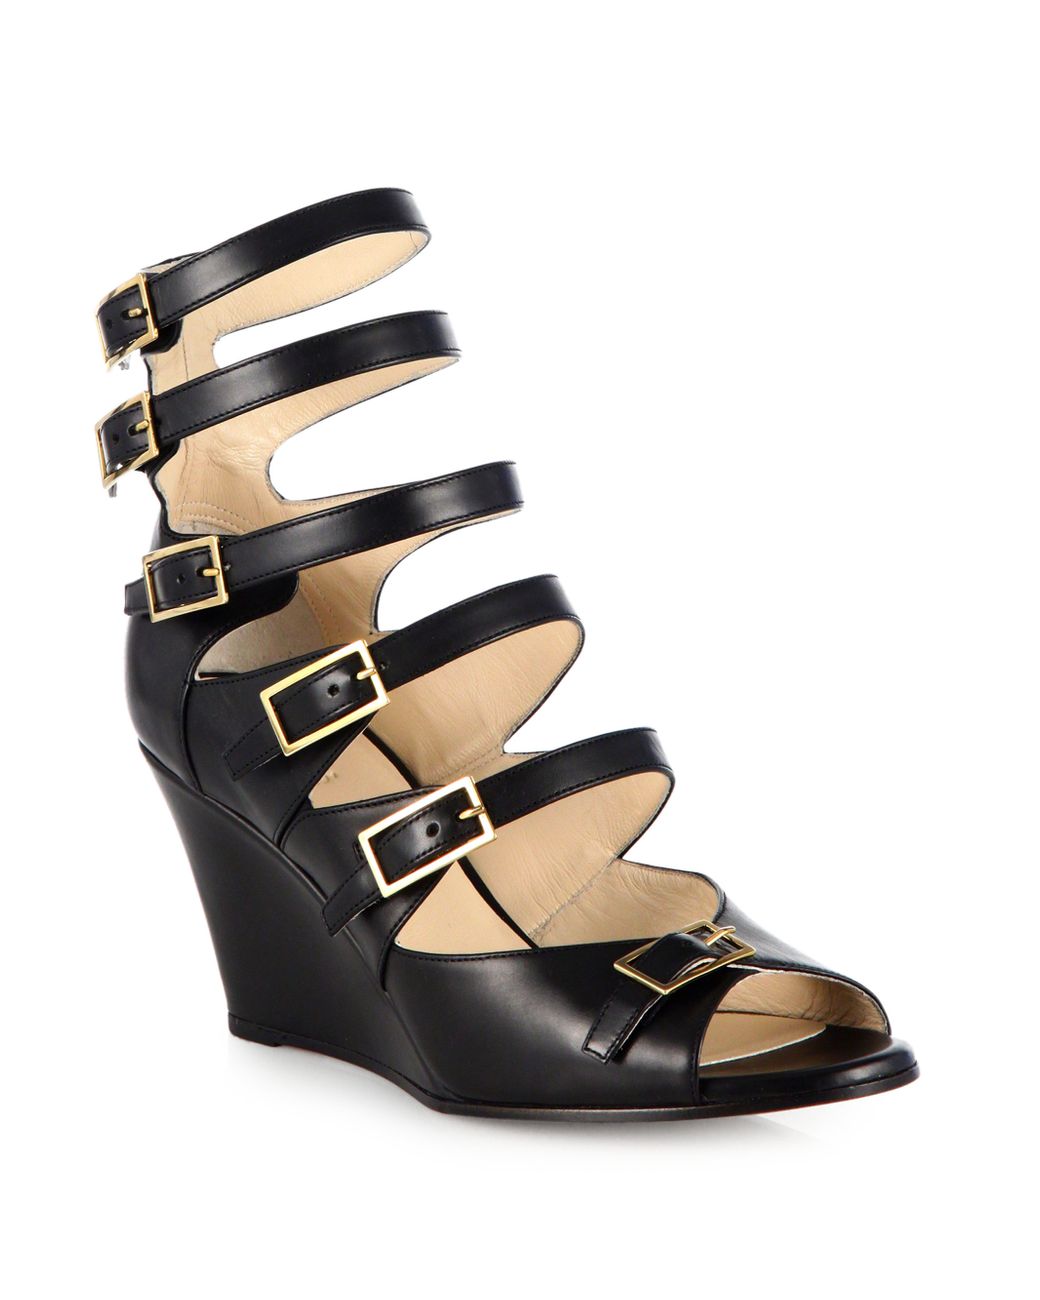 Chloé Strappy Leather Wedge Sandals in Black | Lyst